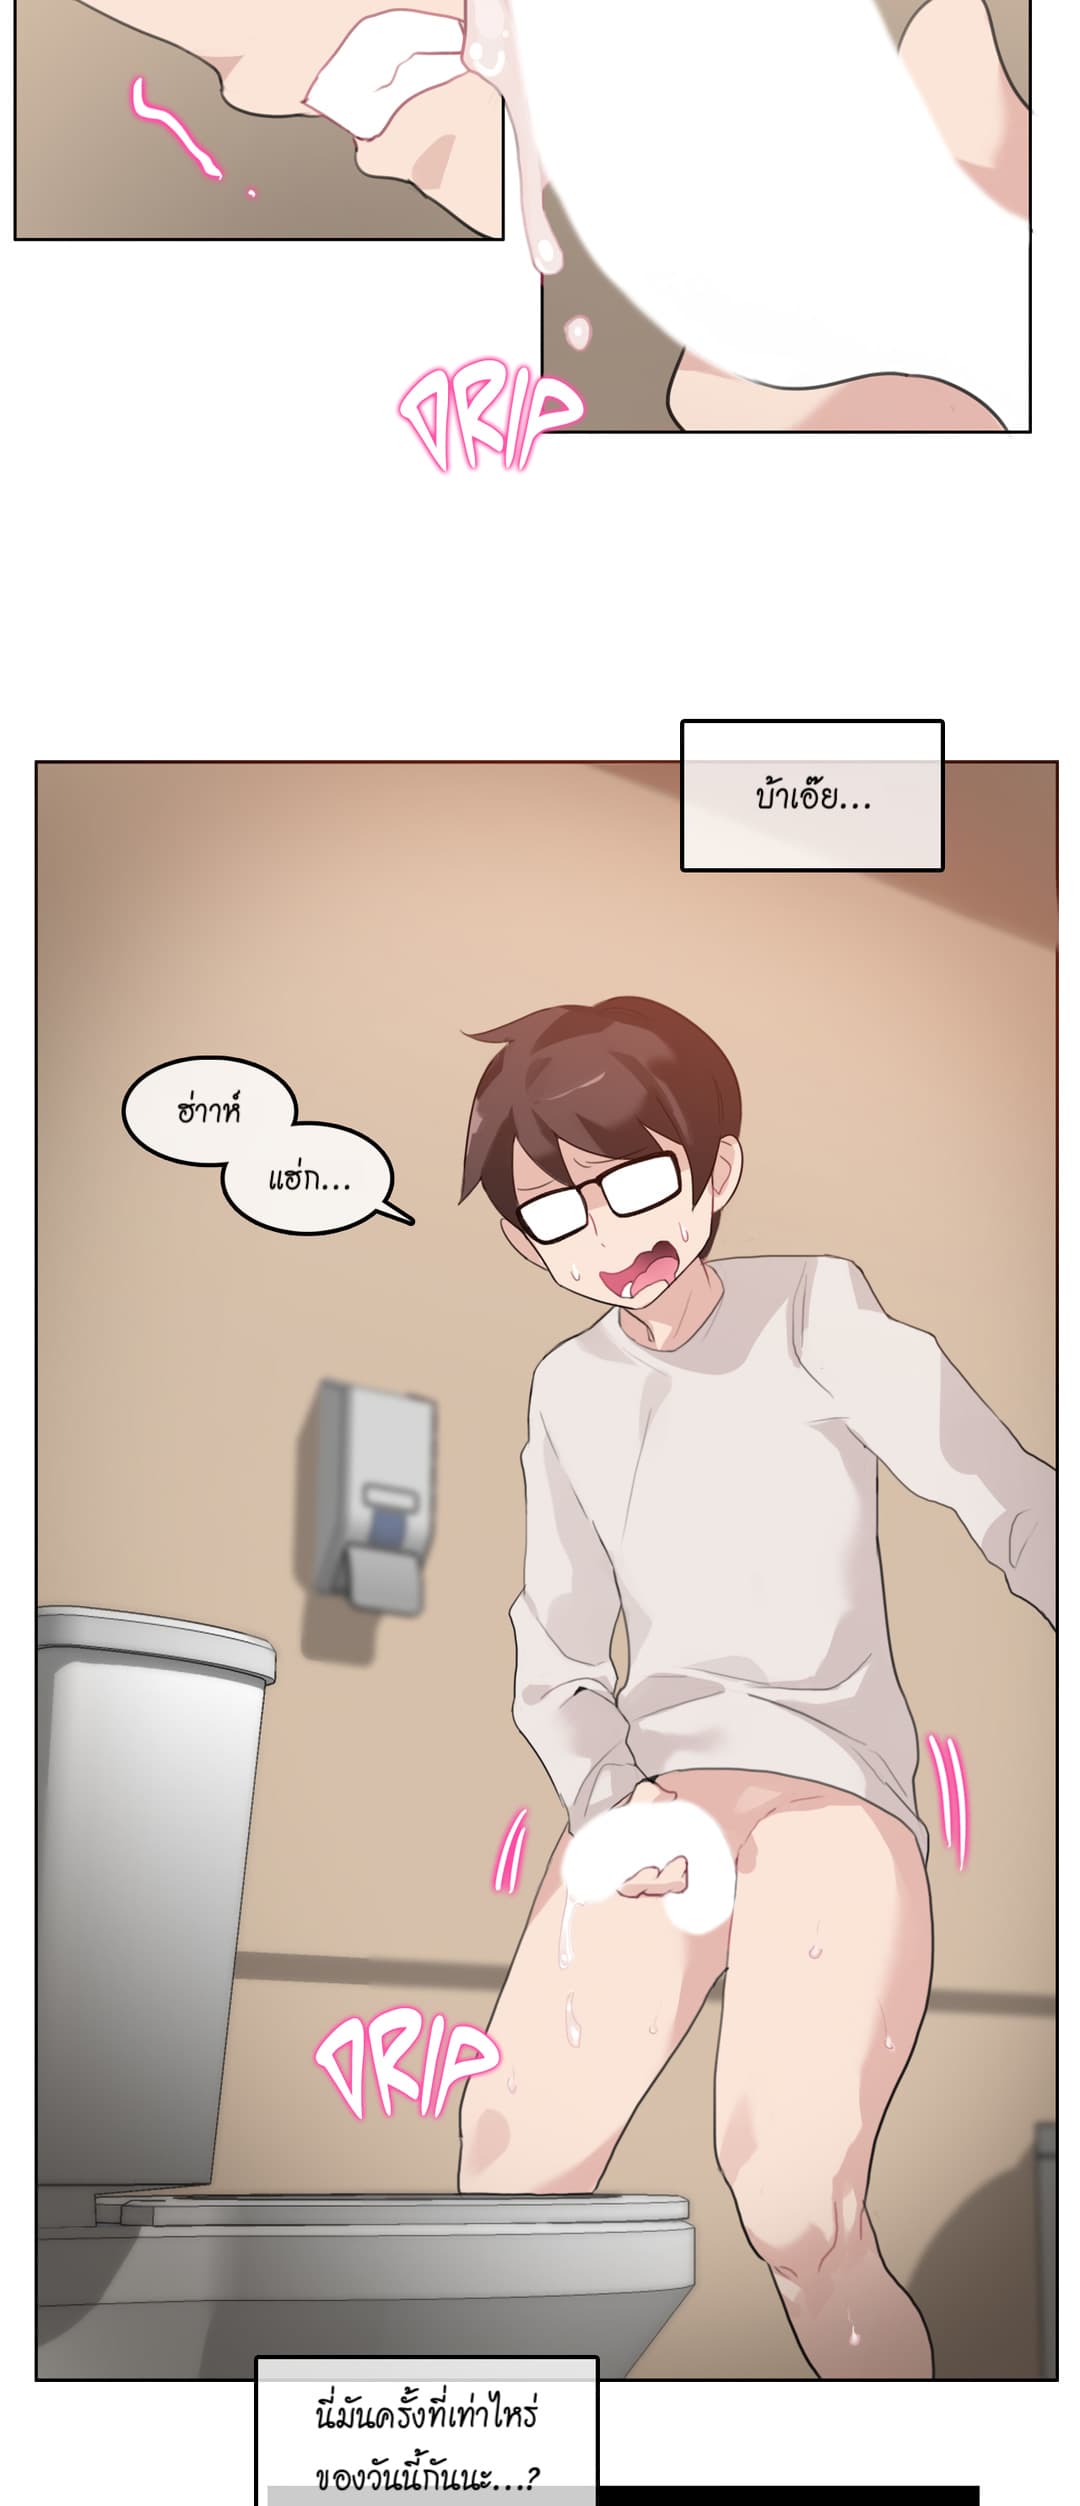 A Pervert’s Daily Life 26 (13)